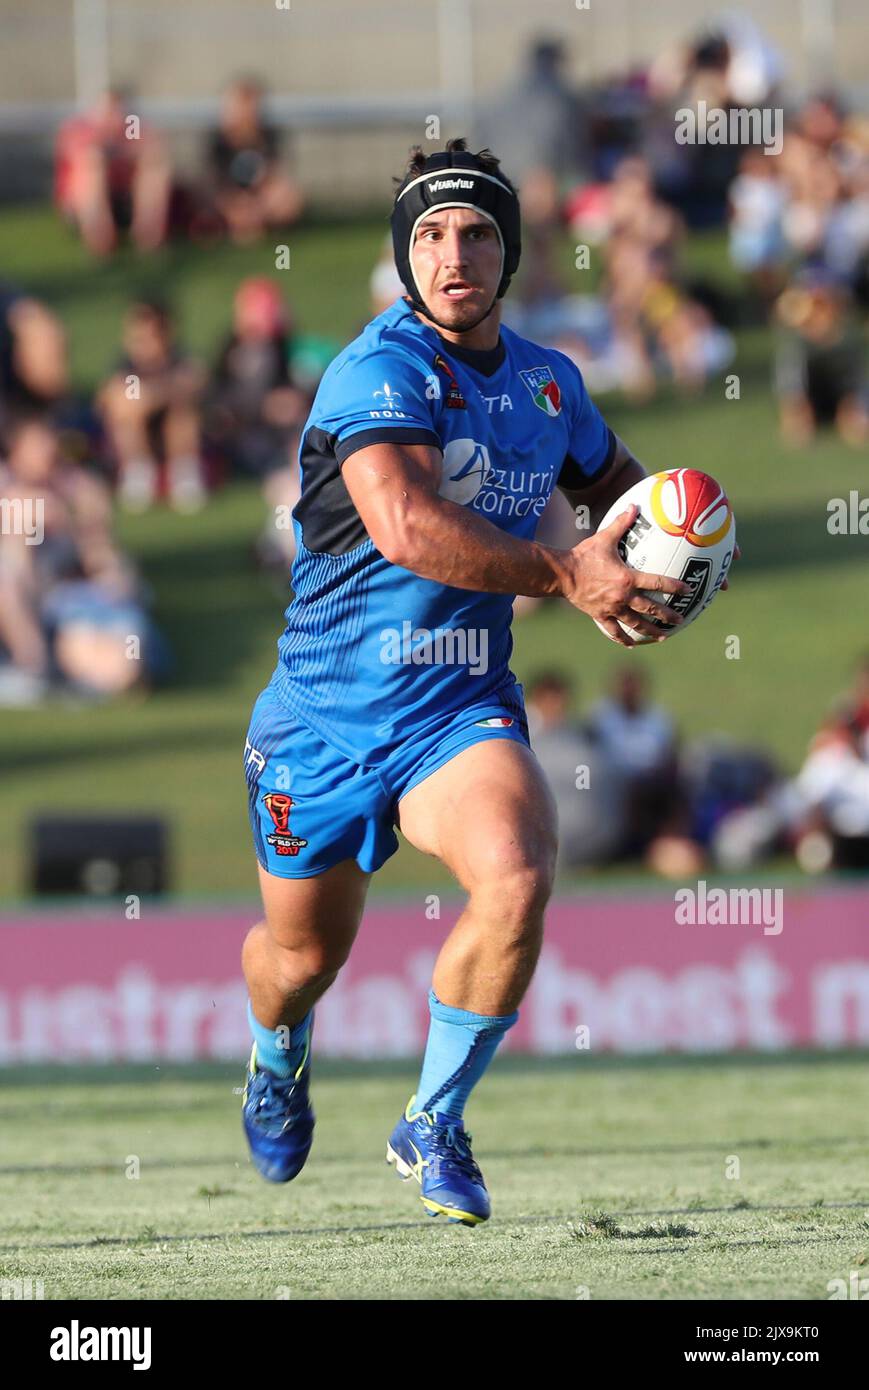 Joseph Tramontana of Italy during the Rugby League World Cup game between Italy and USA at Townsville Stadium in Townsville, Sunday, November 05, 2017